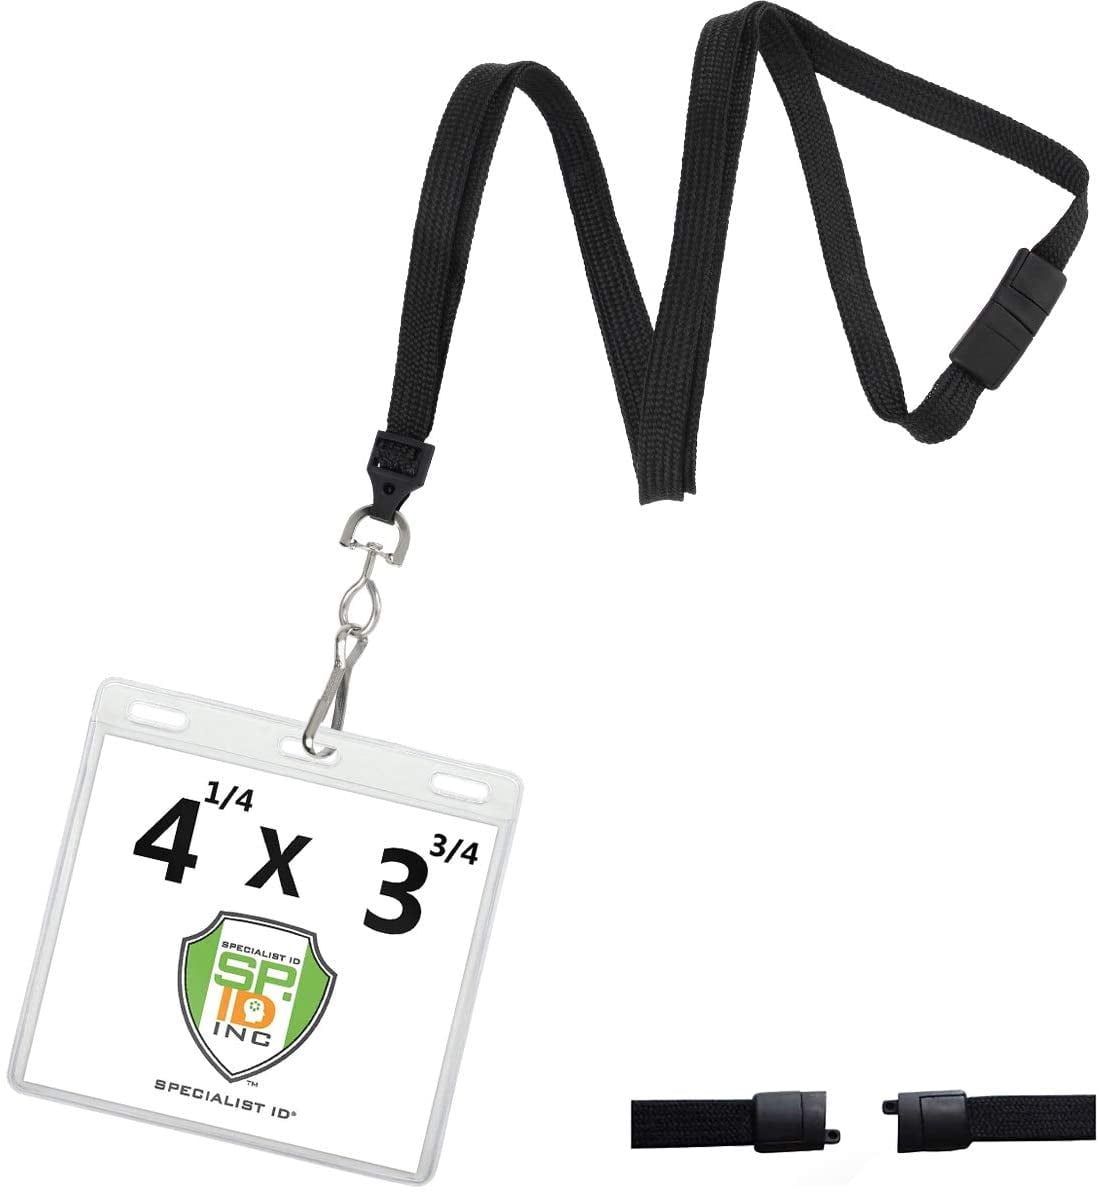 badge holder VISITOR Lanyard with Portrait ID Card Holder FREE P&P!!! 